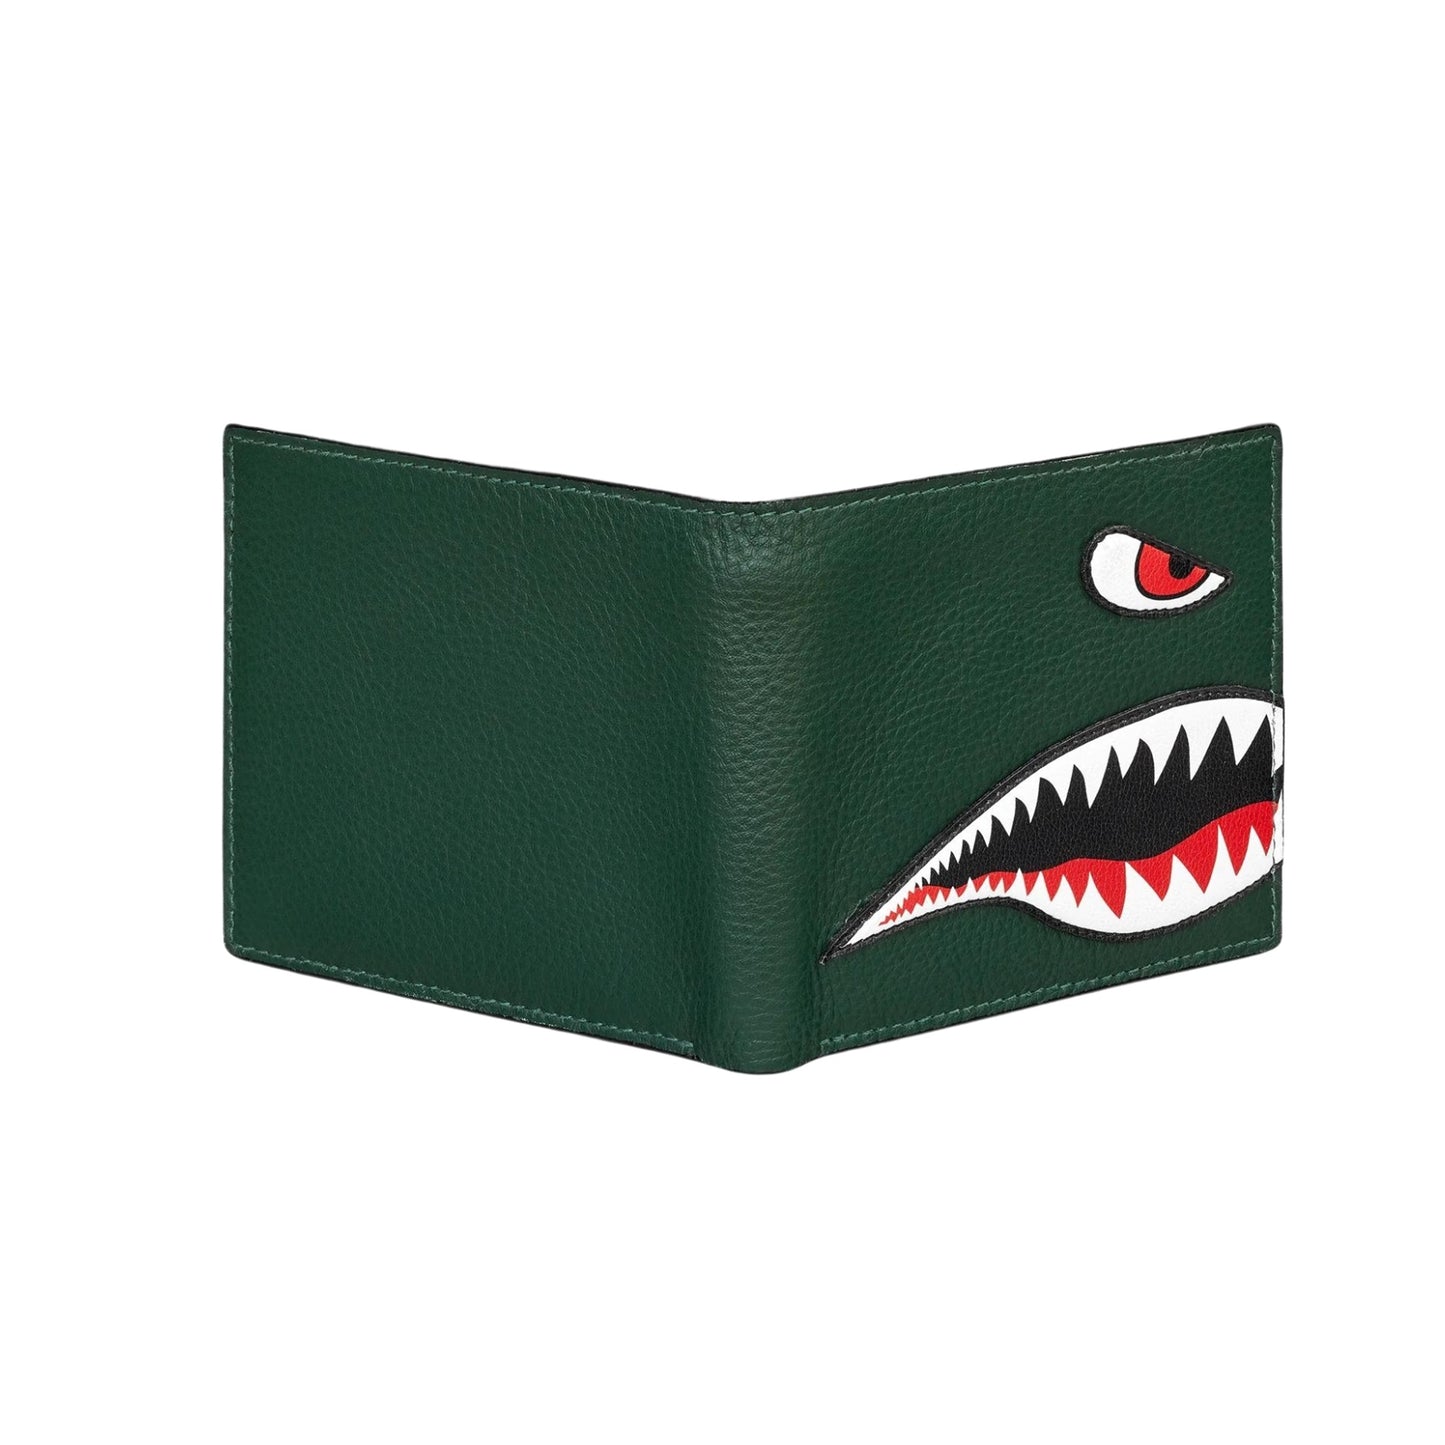 Nose Cone Men's Leather Wallet - Green